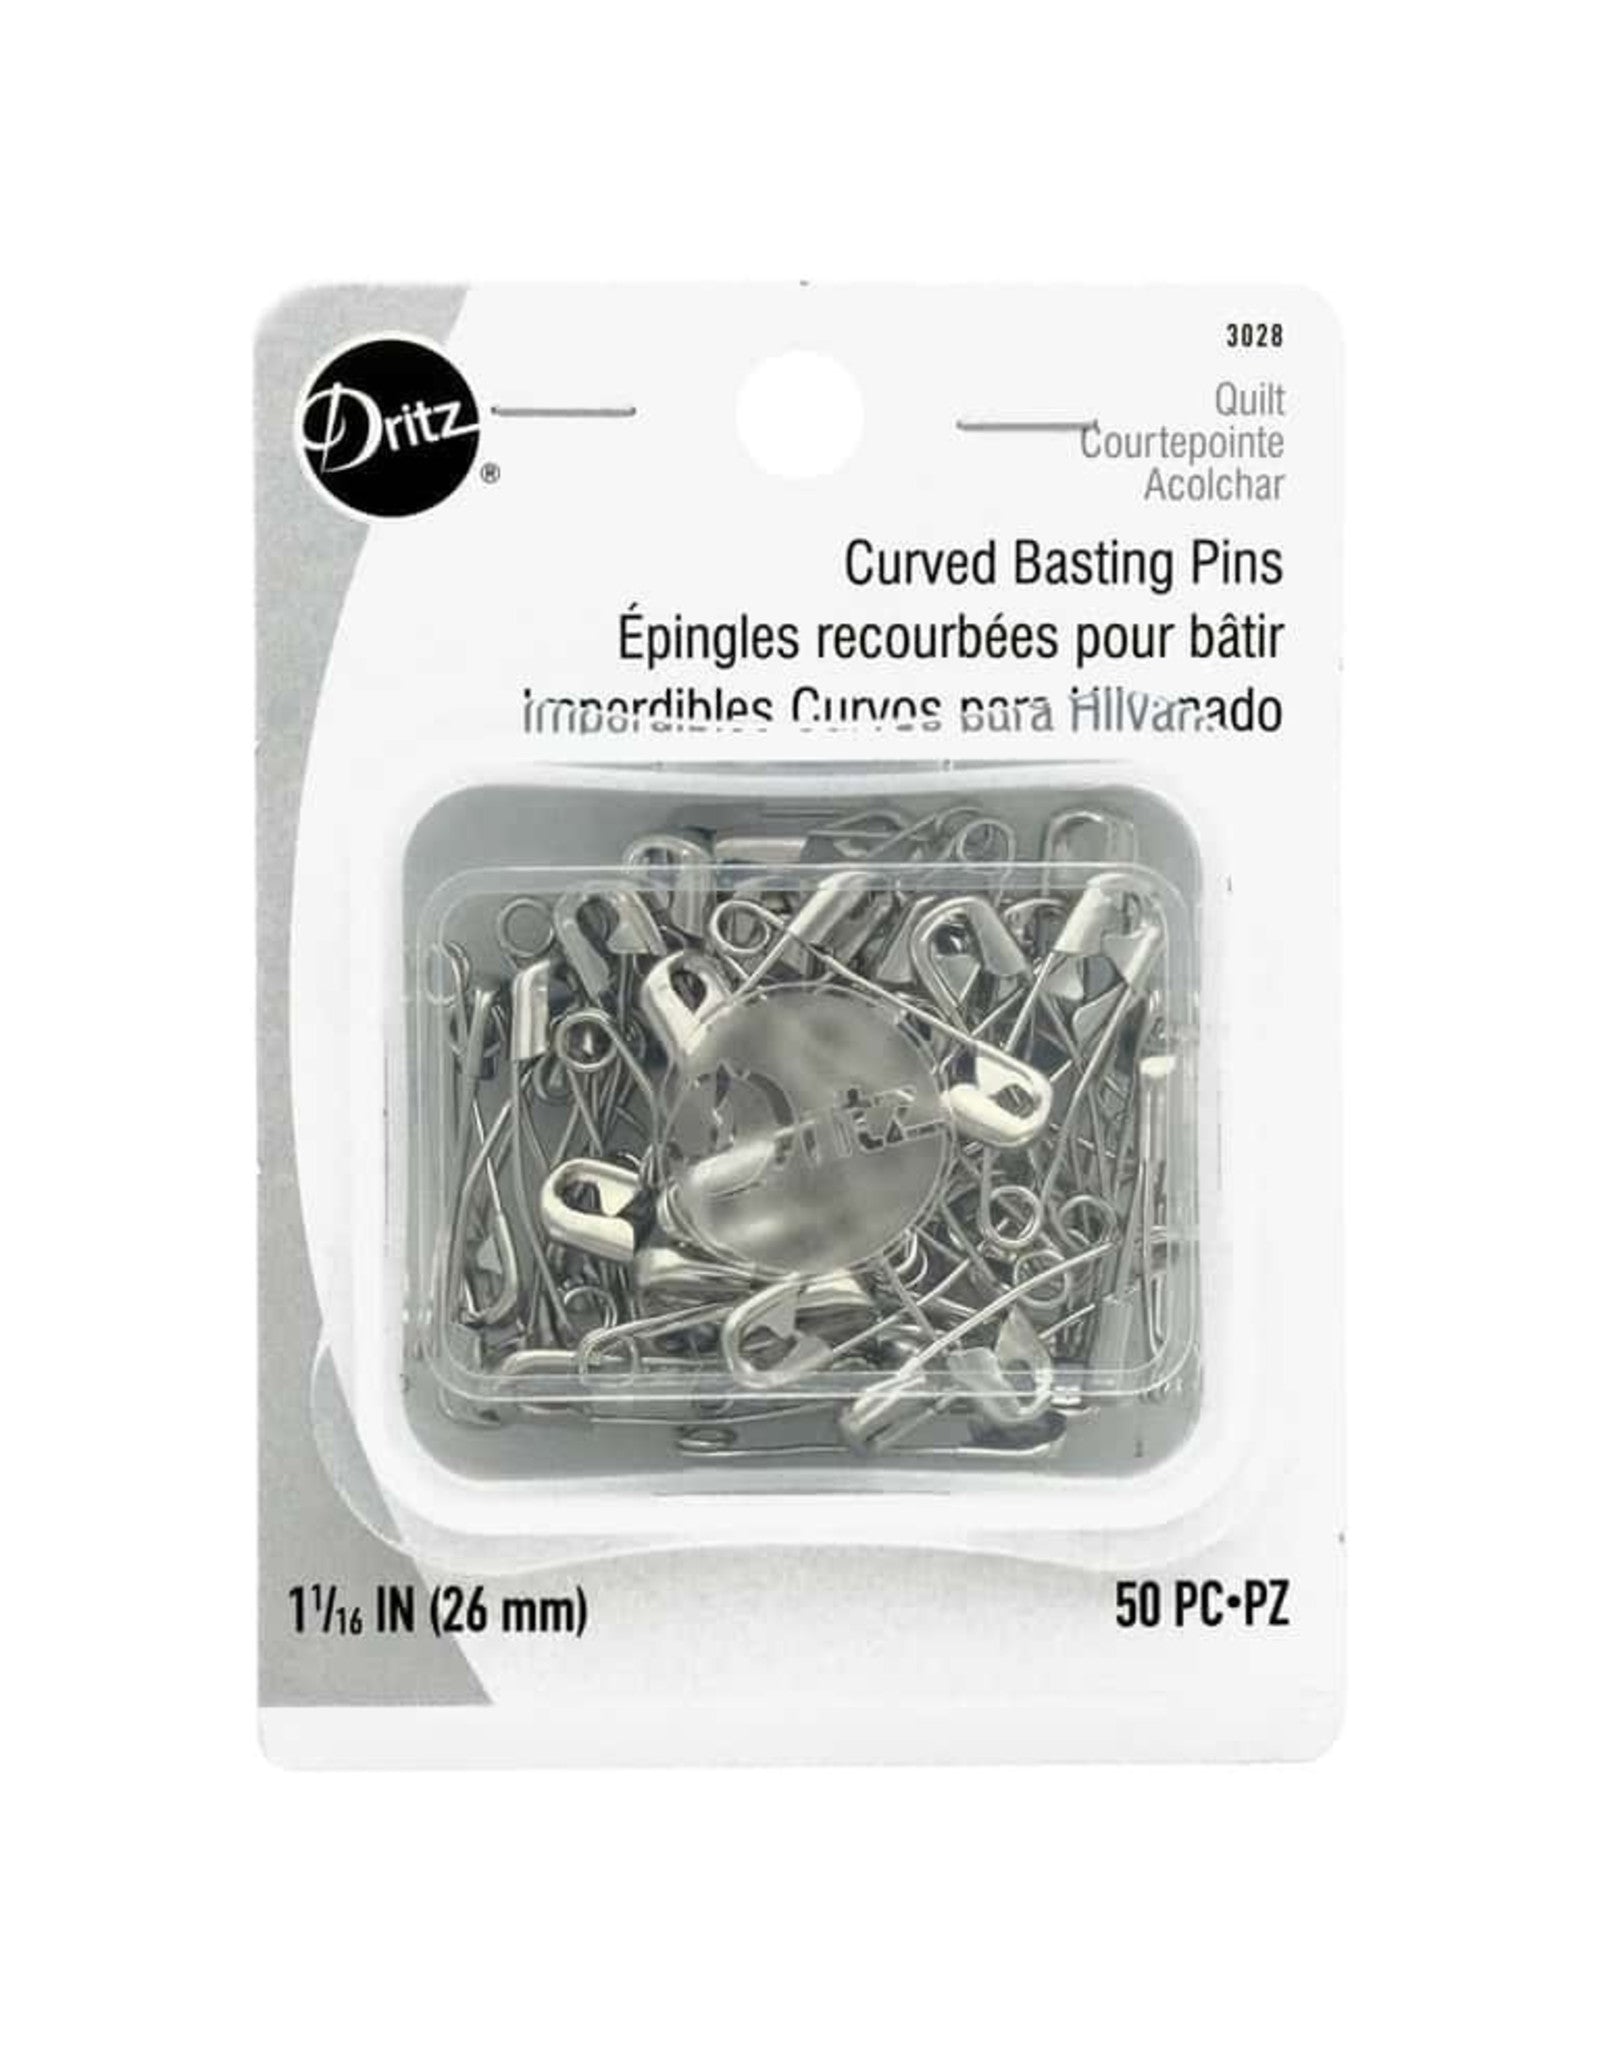 Quilter's Curved Safety Pins - 100pk : Sewing Parts Online